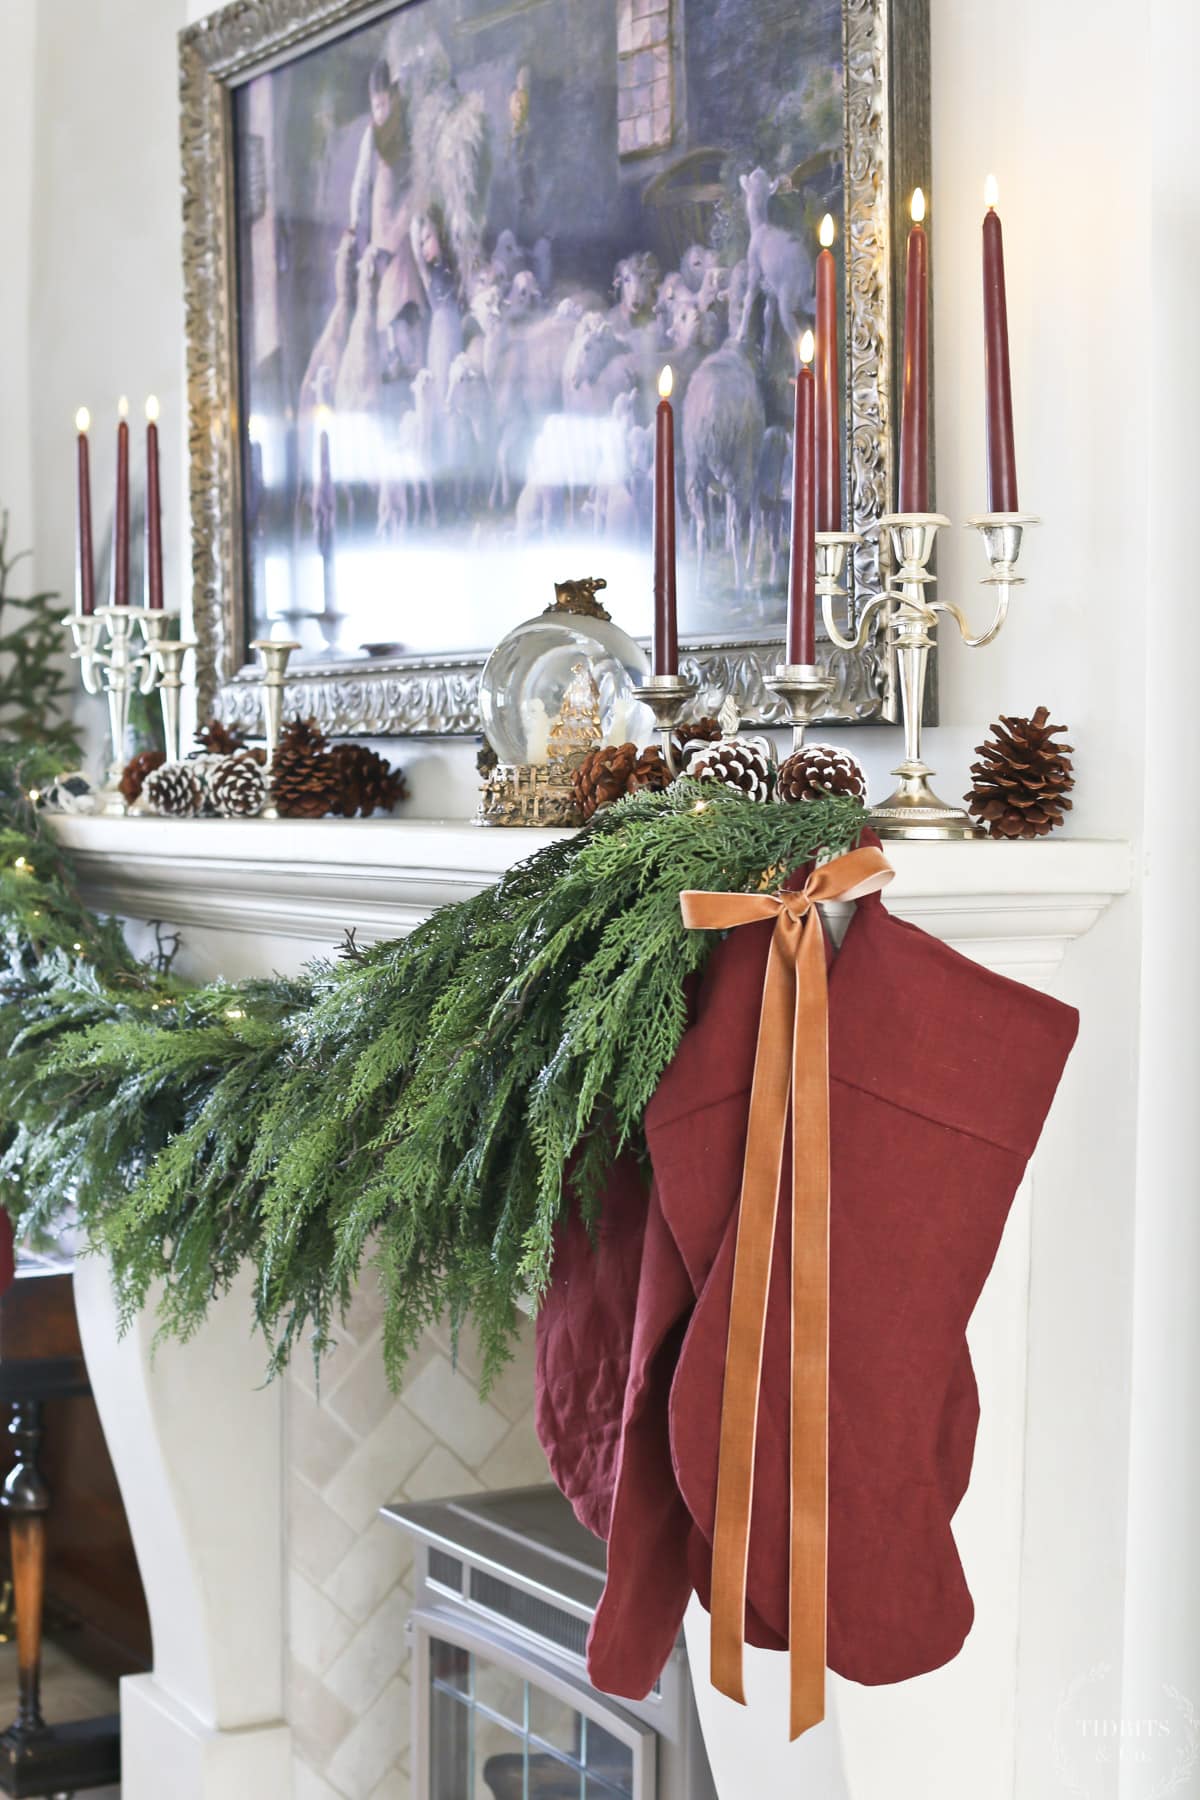 Stockings and garland on a decorated Christmas mantel